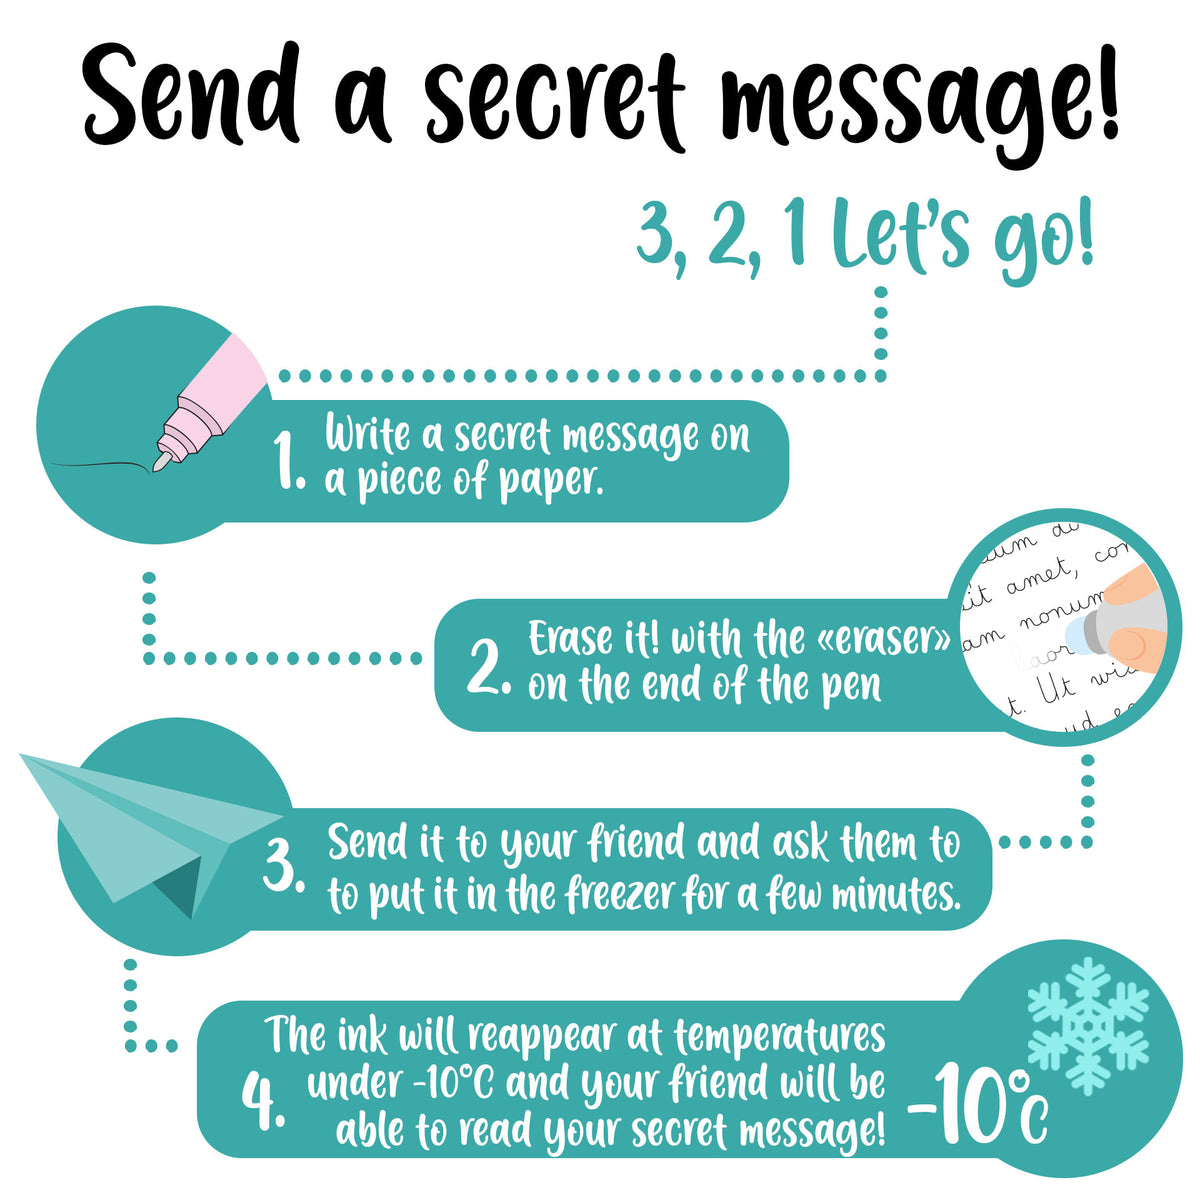 Instructions for how to send a secret message with Legami erasable pens.